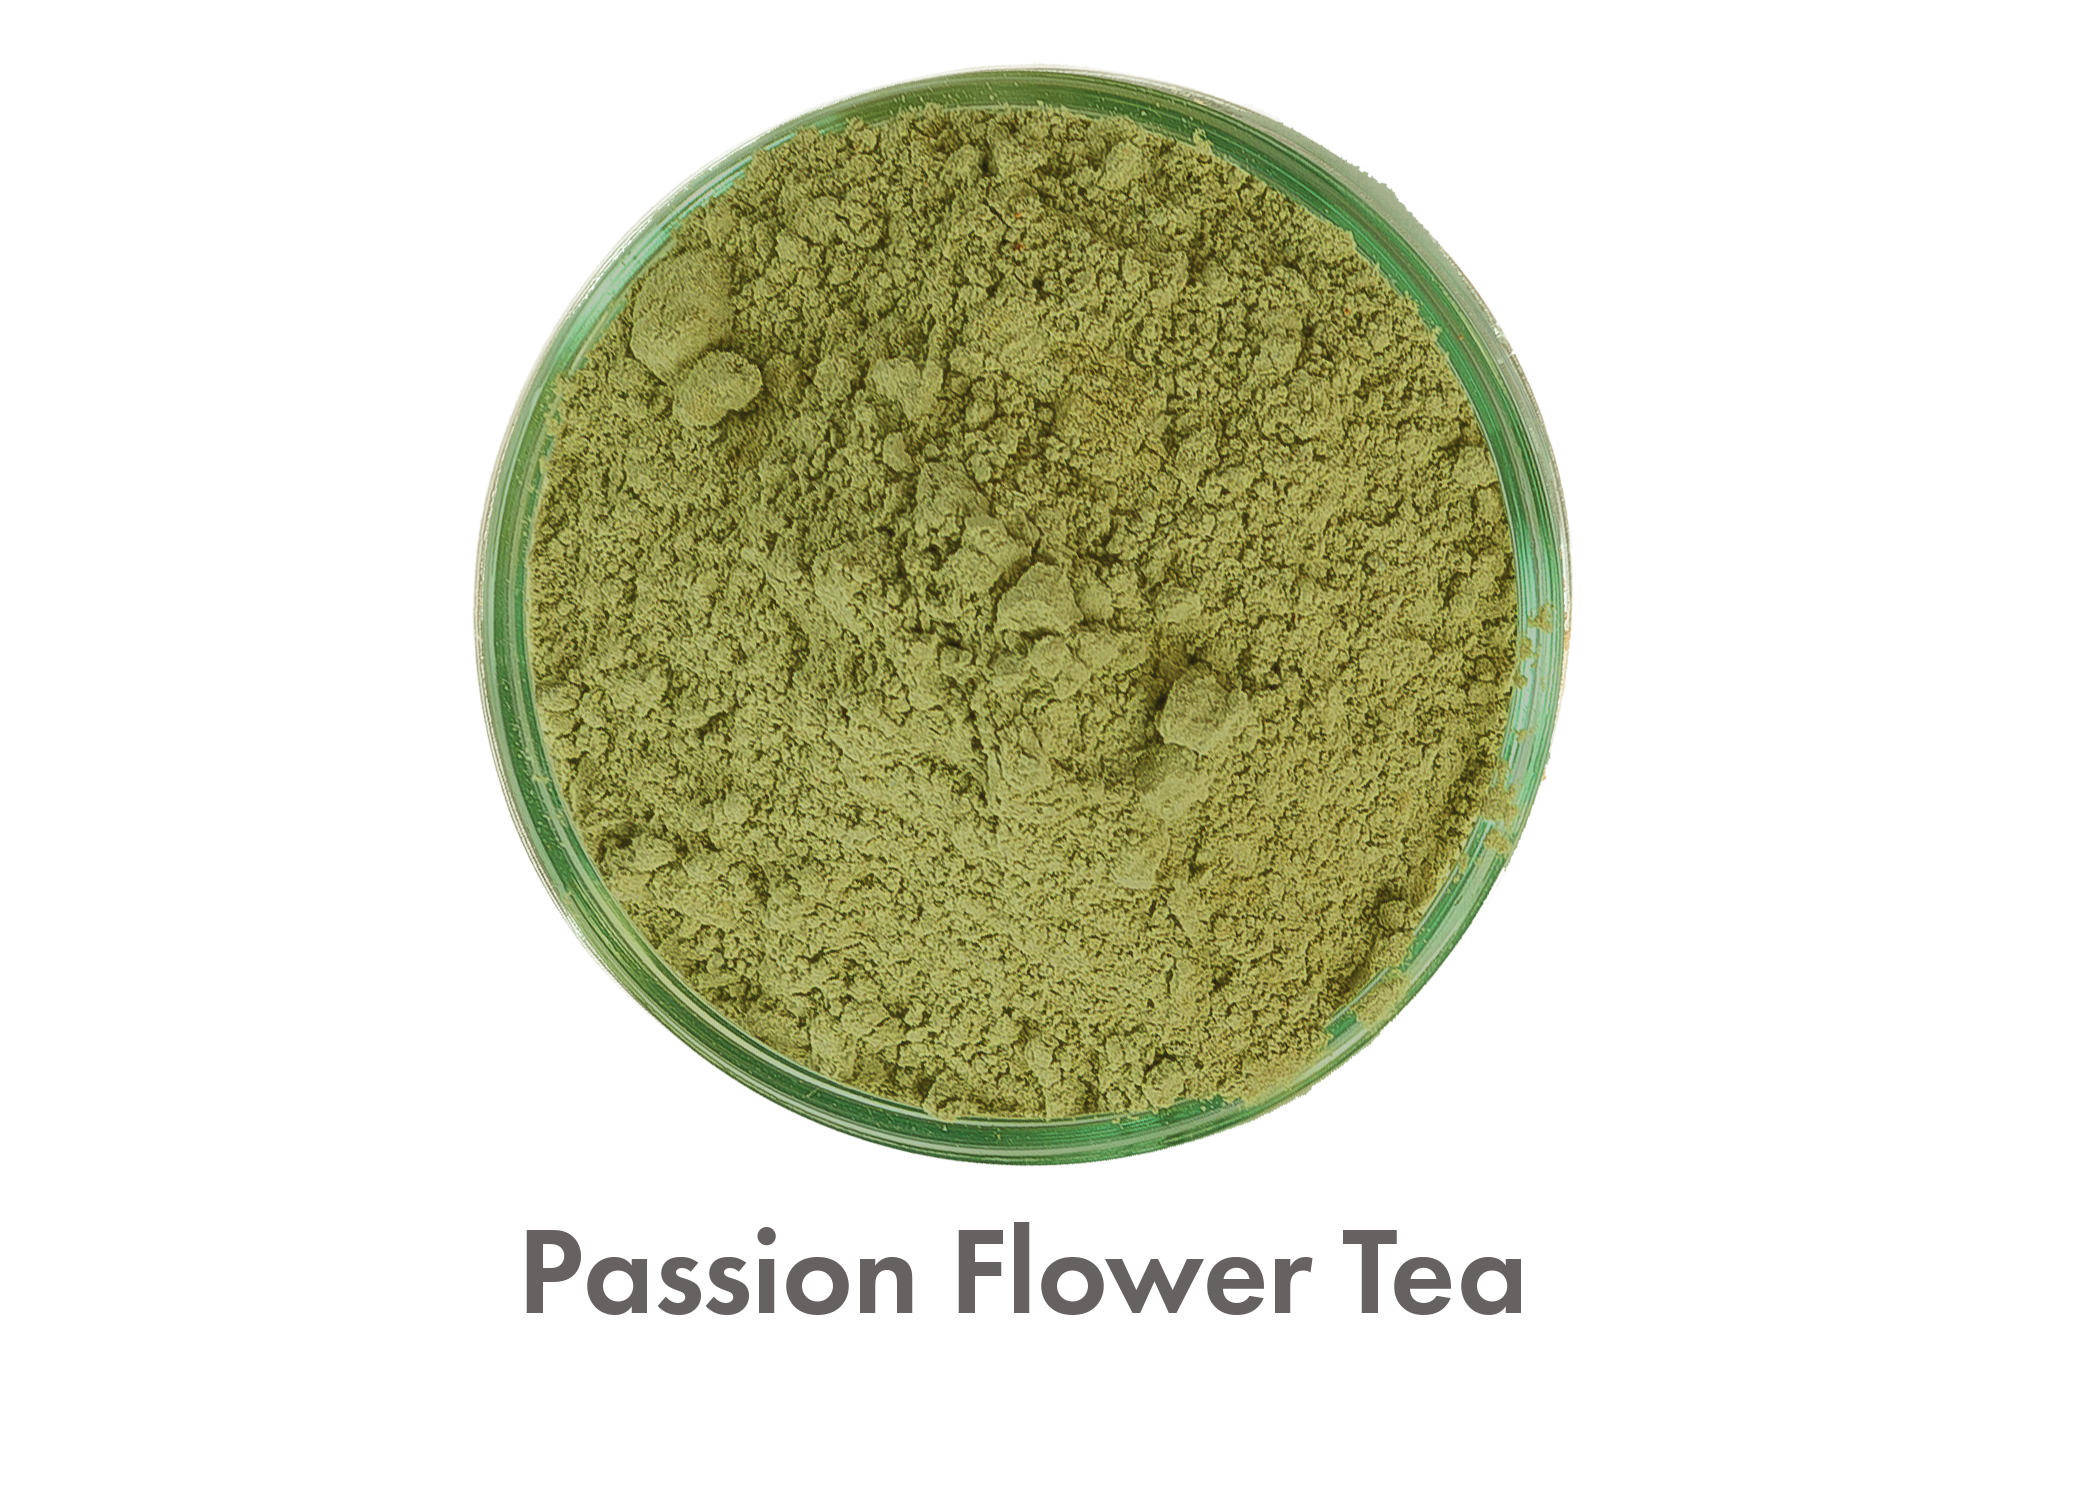 Passsion Flower Tea USE THIS ONE.png